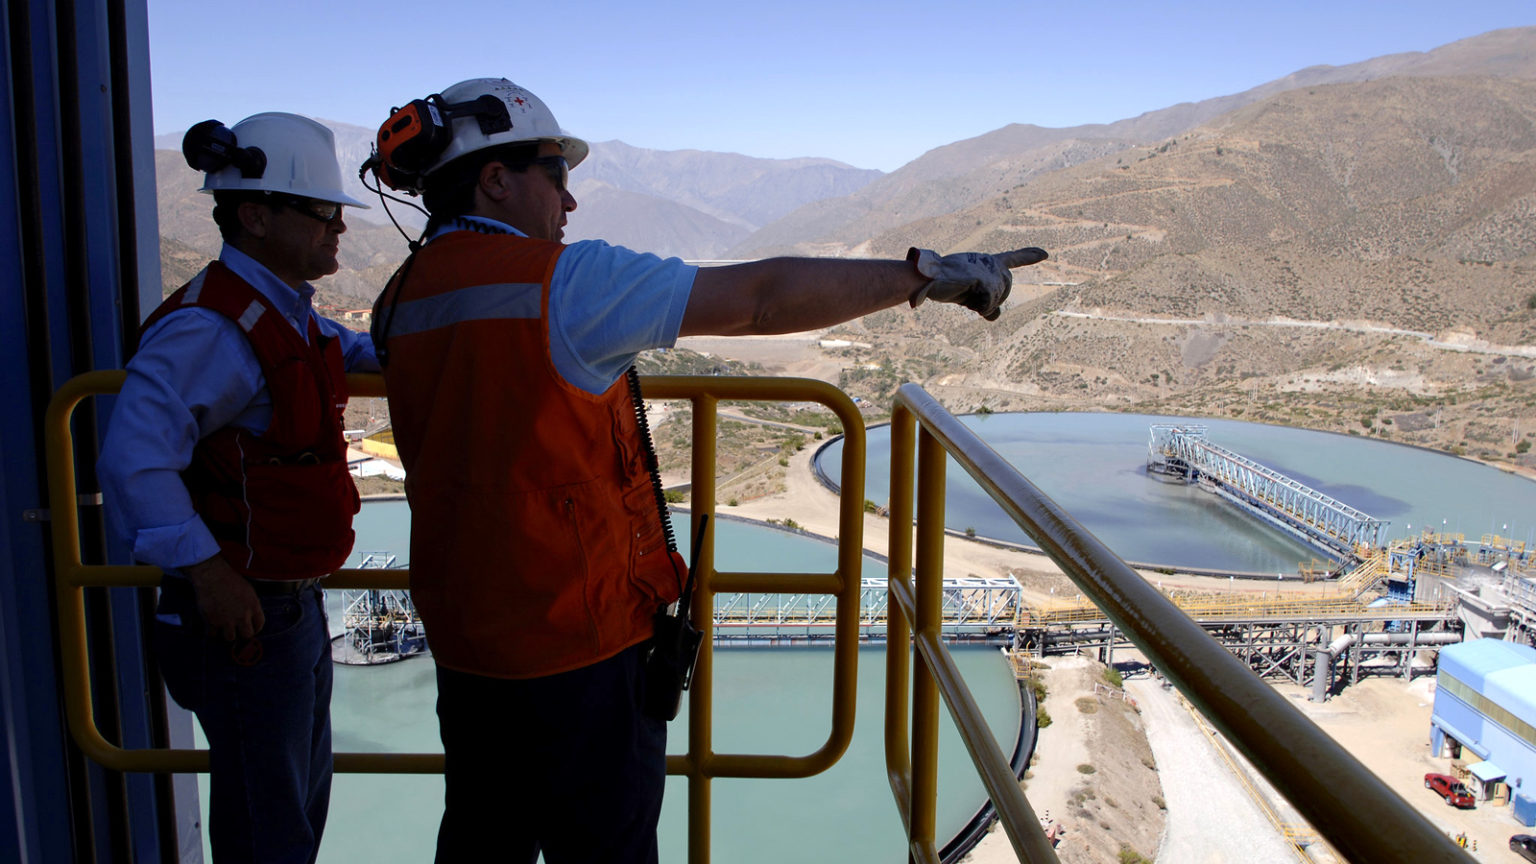 Antofagasta sees full-year production at bottom end on Los Pelambres issues